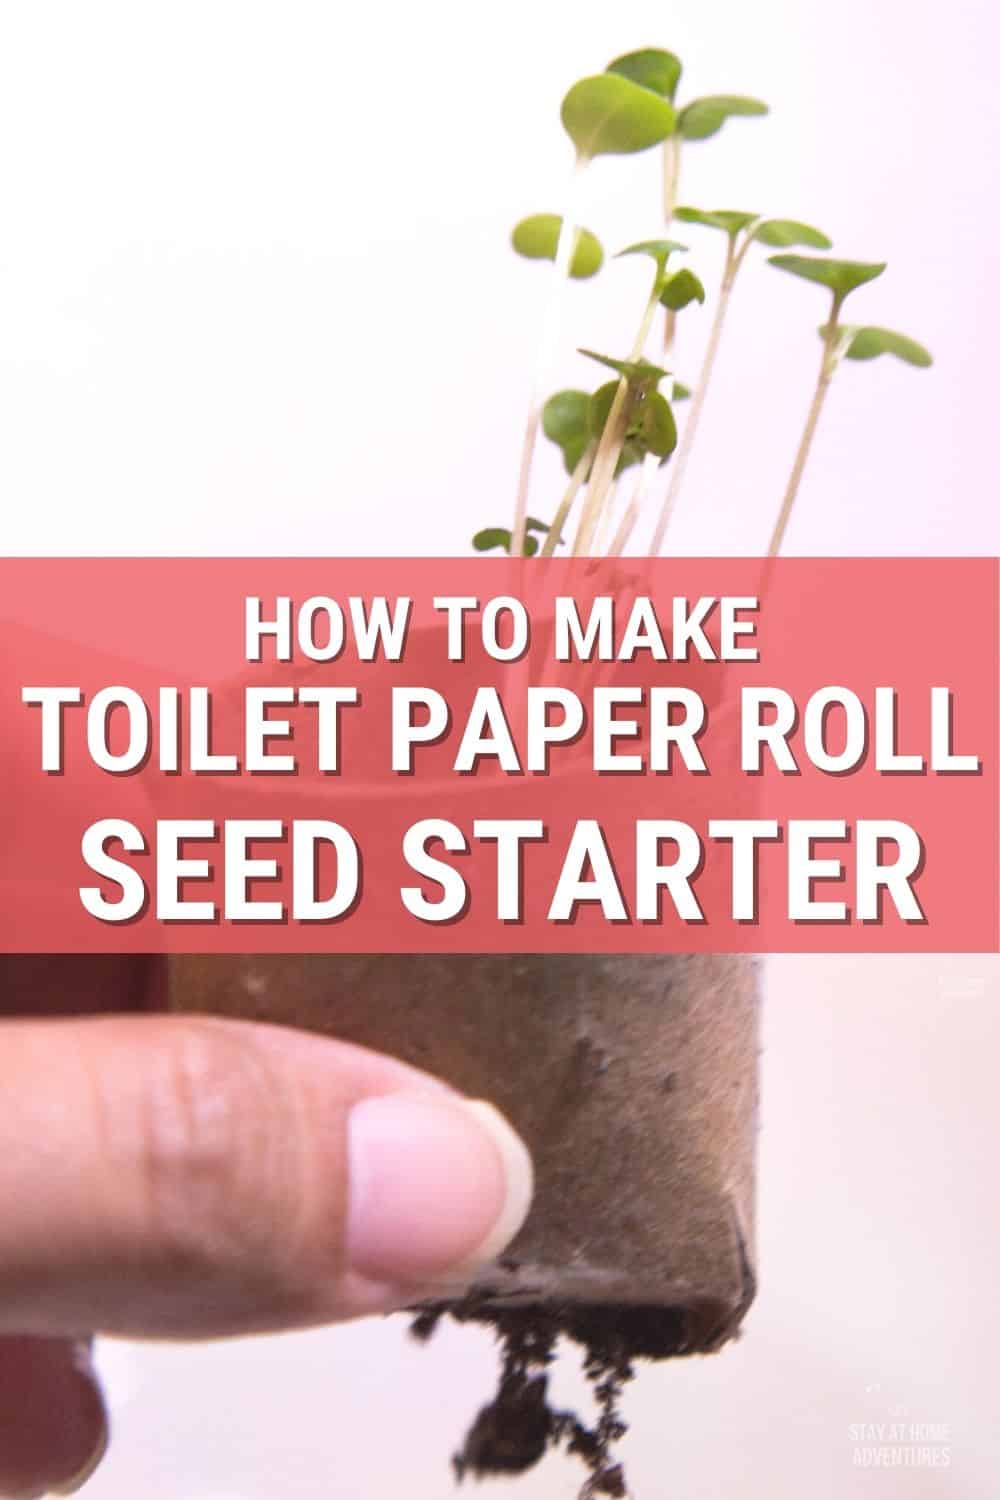 This toilet paper seed starter tutorial is all you need to seed starting indoor this season. Learn all you need to know and start growing your garden today. #gardening #seeding #toiletpaperseedstarter via @mystayathome